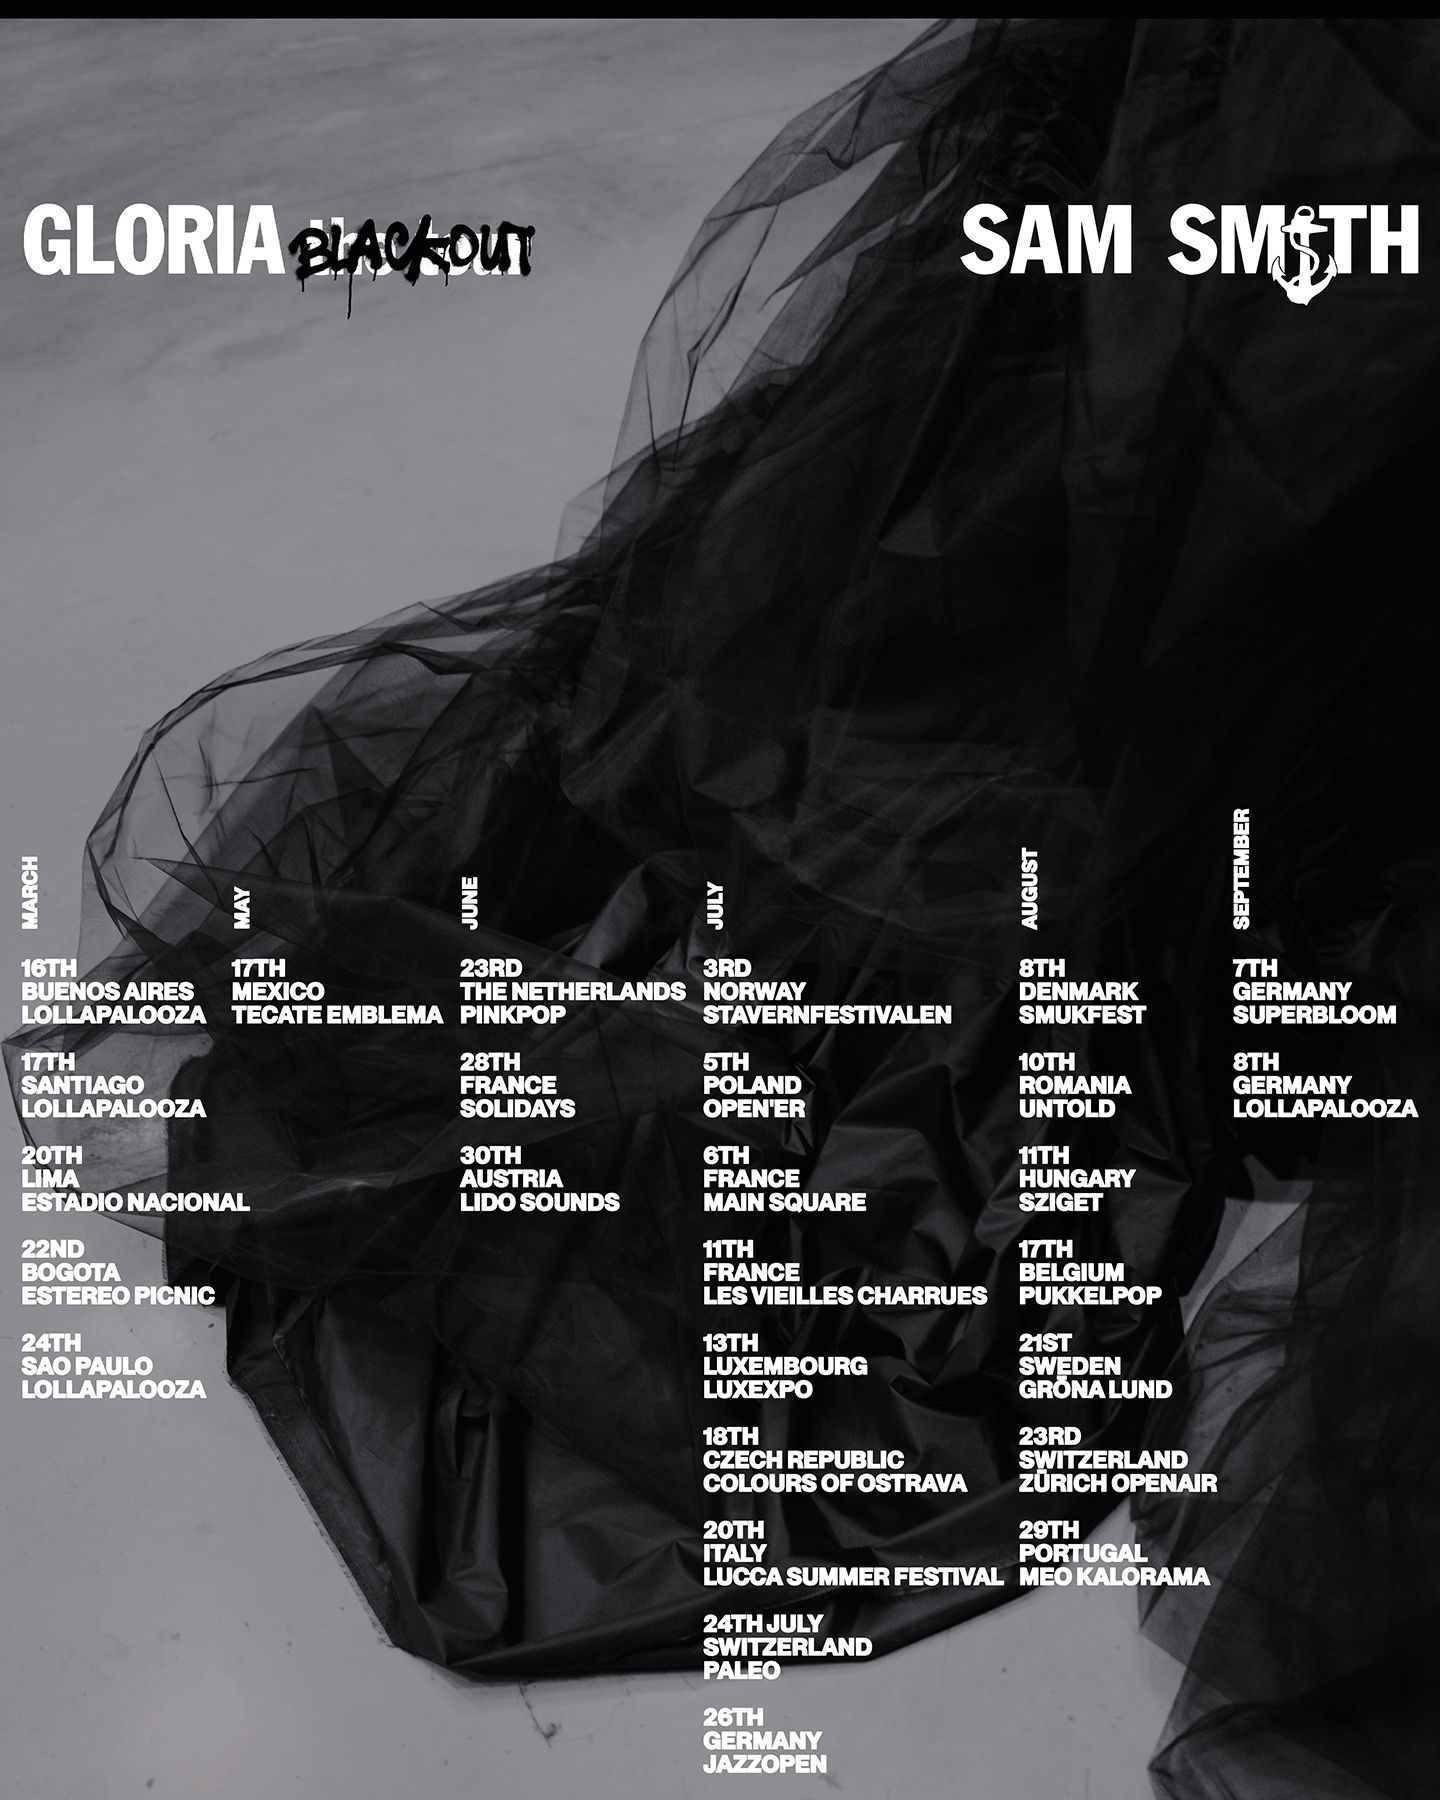 sam smith tour support